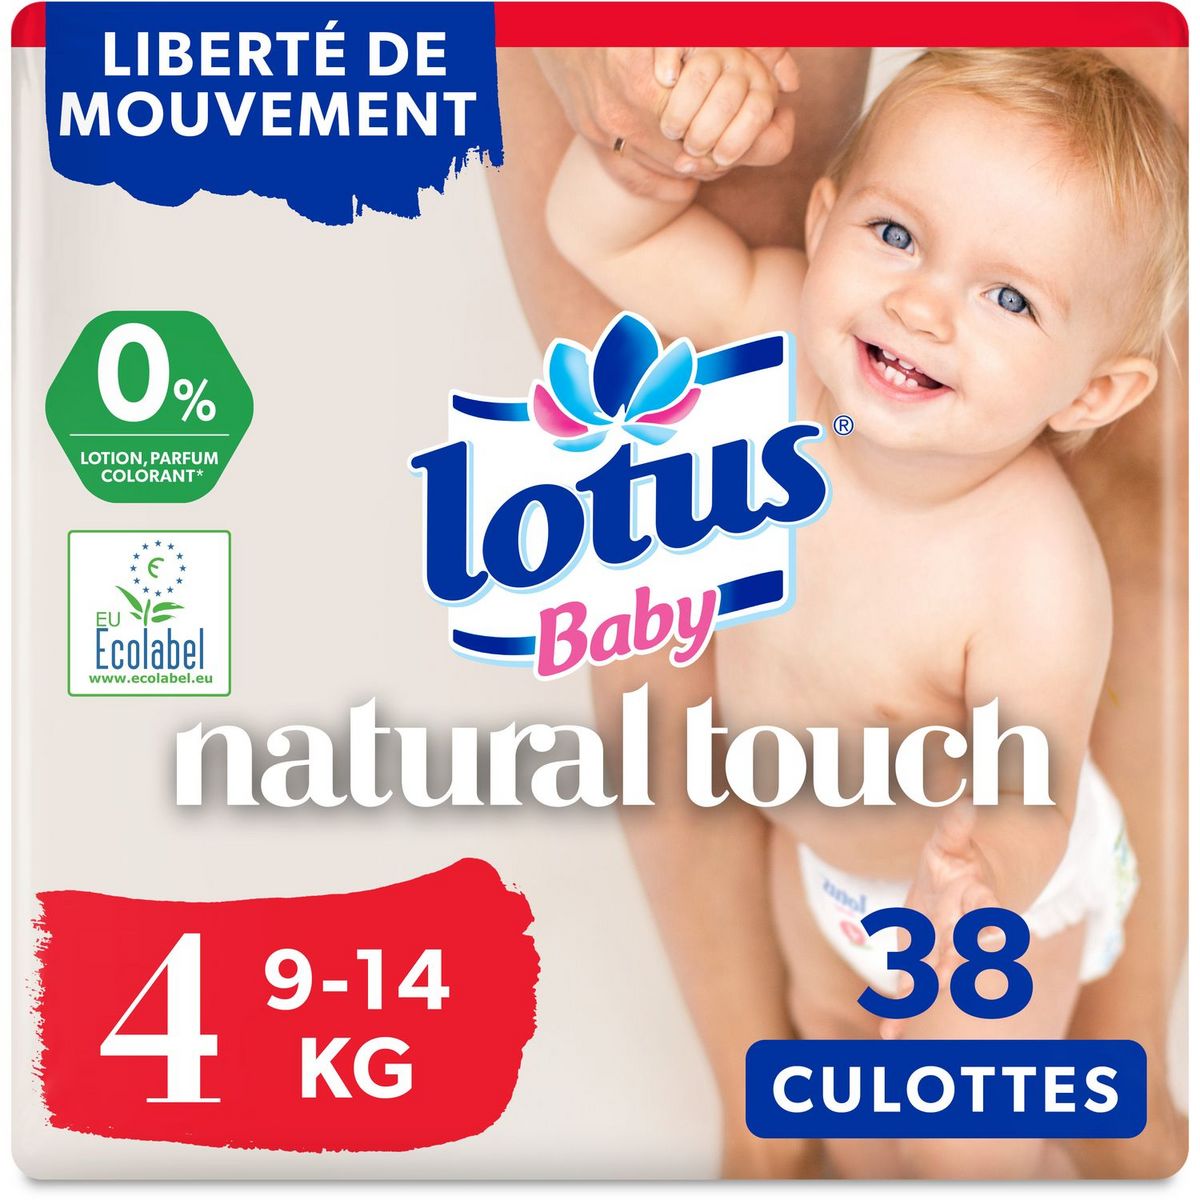 3€ Lot de 11 couches Baby Ultra-dry+ 2 couches lotus Baby - Vinted